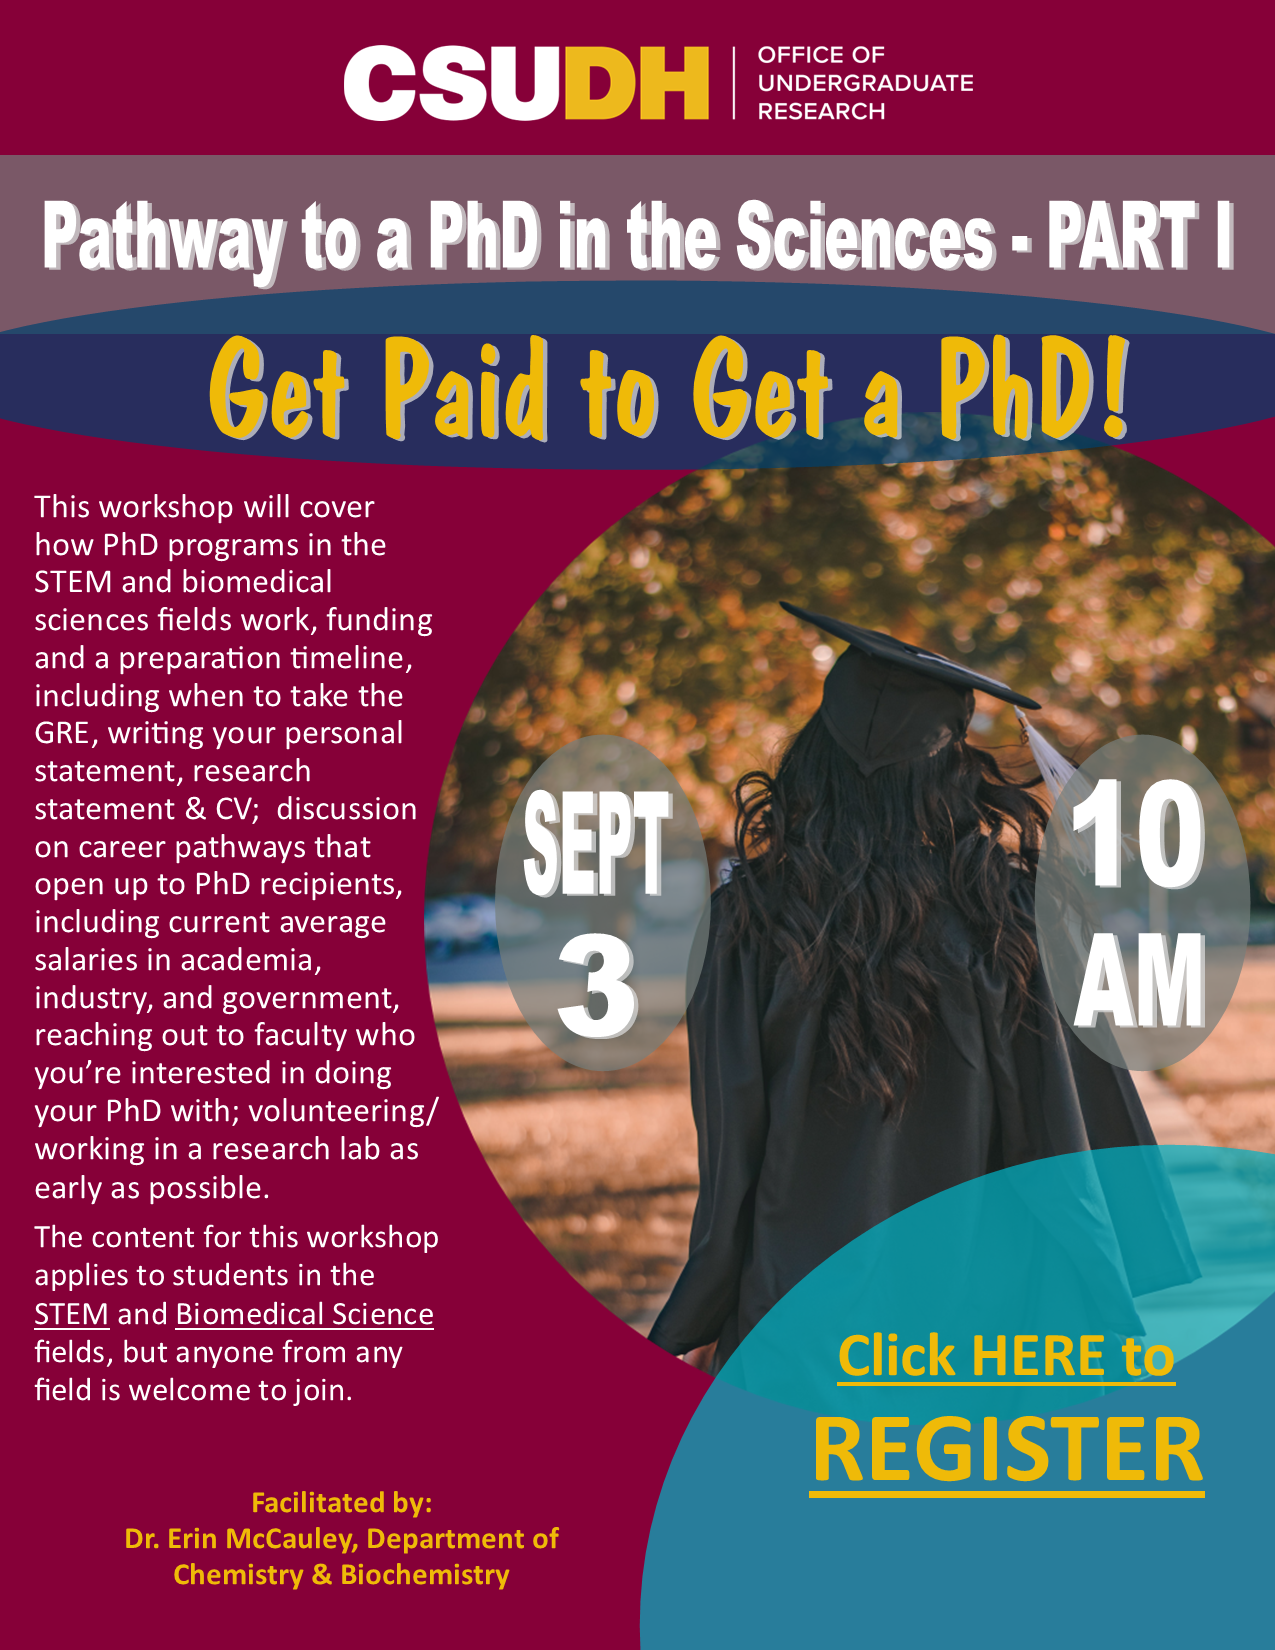 Pathway to PhD Part 1 9-3-21